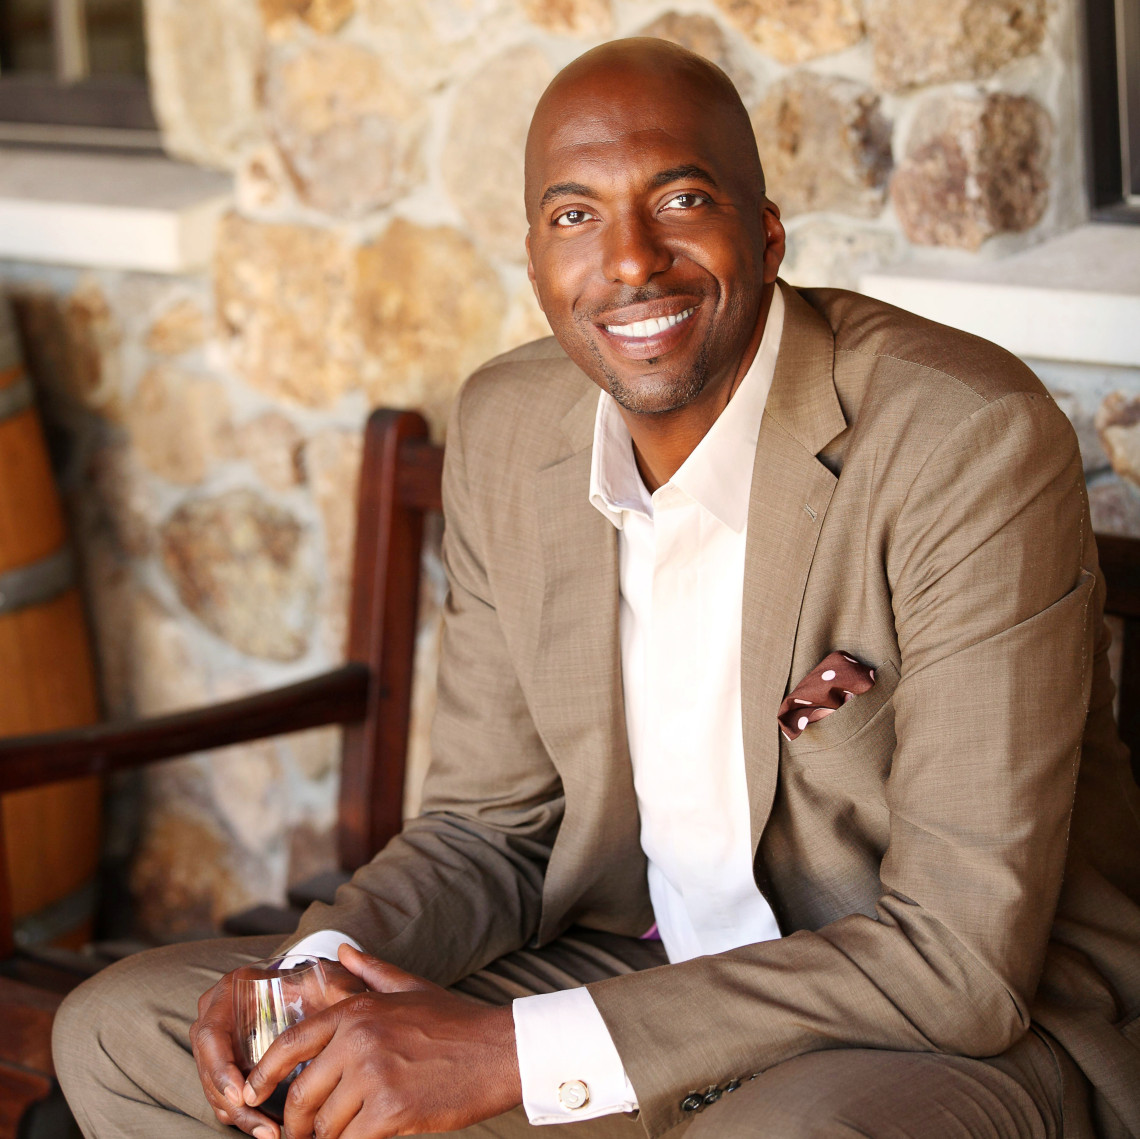 "Super Sexy Vegan" is how John Salley describes himself in this #TBT episode of The Food Heals Podcast! John is also a father, activist, actor and NBA star. We interviewed the former Detroit Piston for our film, Food Heals. John tells the story of how he healed all his health problems holistically. Suffering from high cholesterol and a compacted colon, John used a vegan diet and colonics to heal his body and bring himself back into balance so he could continue to play basketball. For more information visit www.FoodHealsNation.com/16